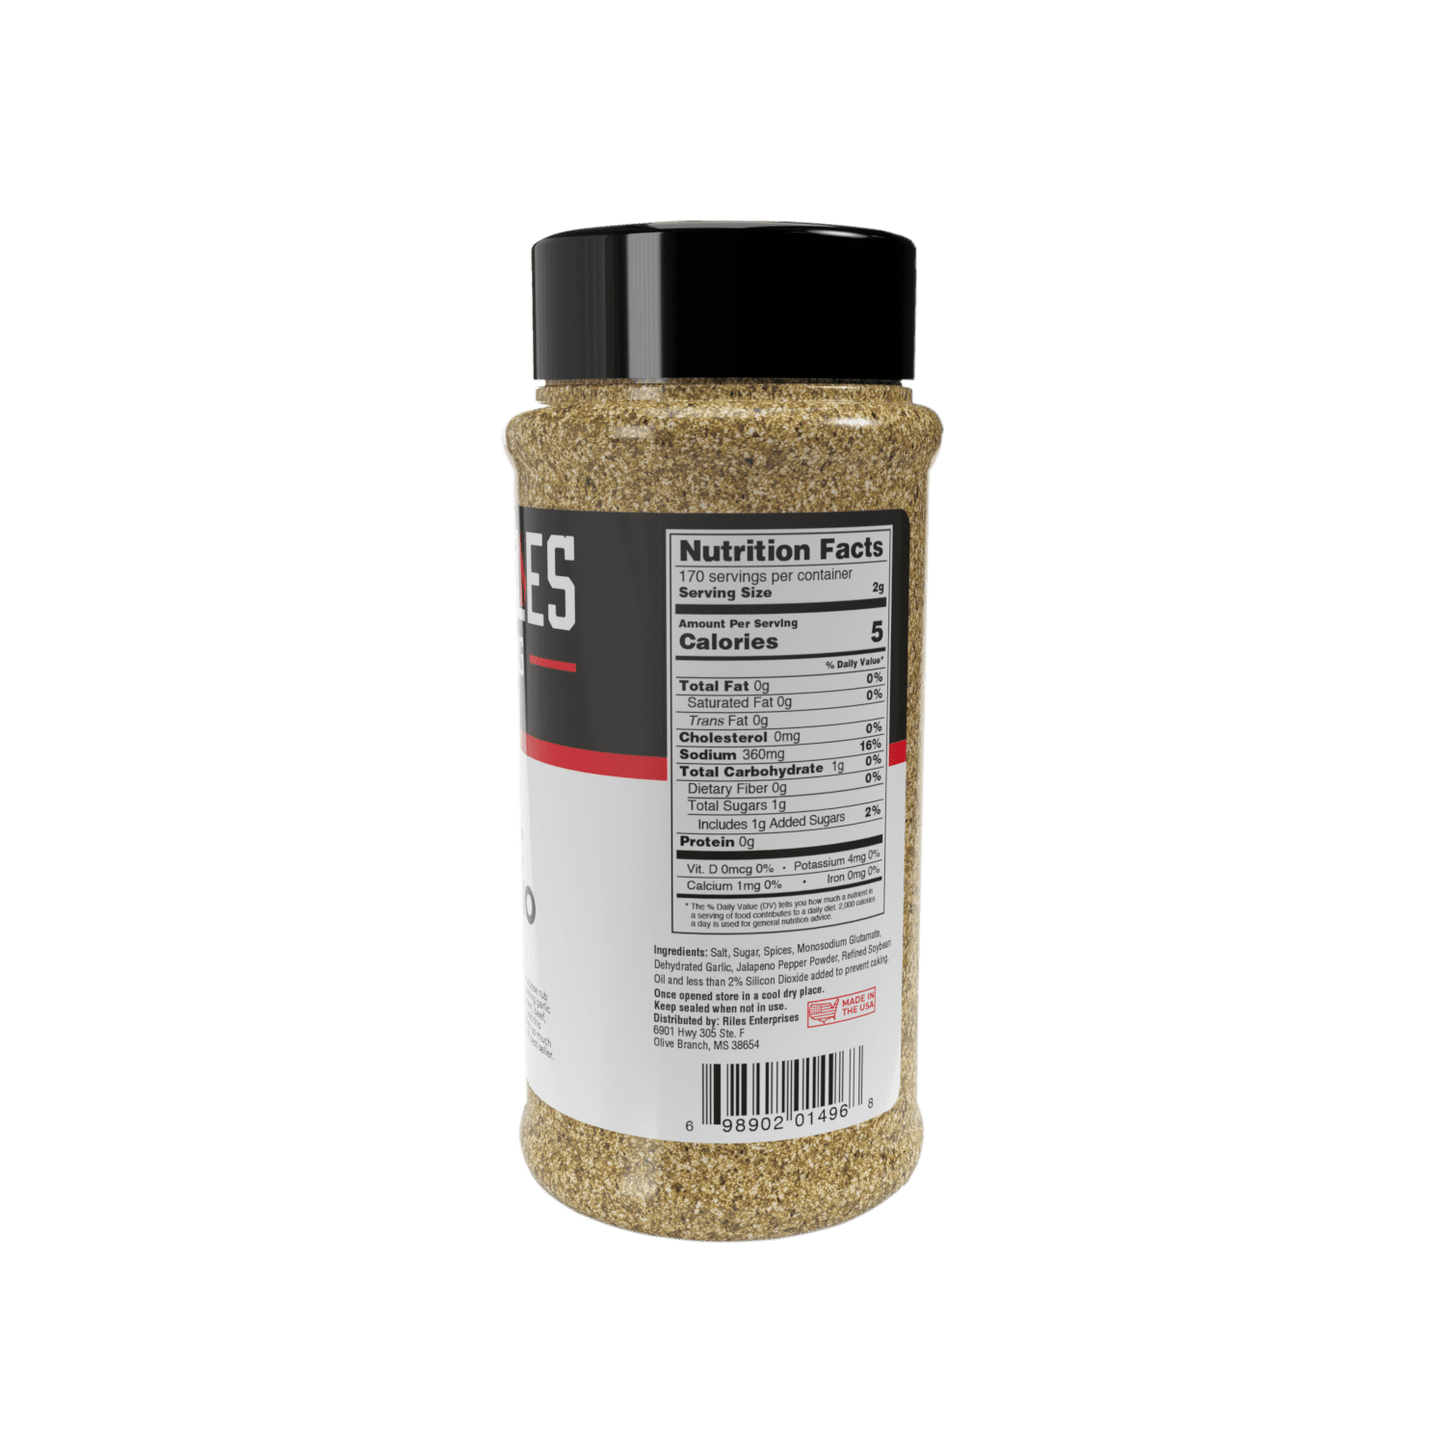 Heath Riles BBQ Garlic Jalapeño Rub Combo with Refill Bag (1 Rub, 1 Refill  Bag), Competition Winning Products from Pitmaster Heath Riles